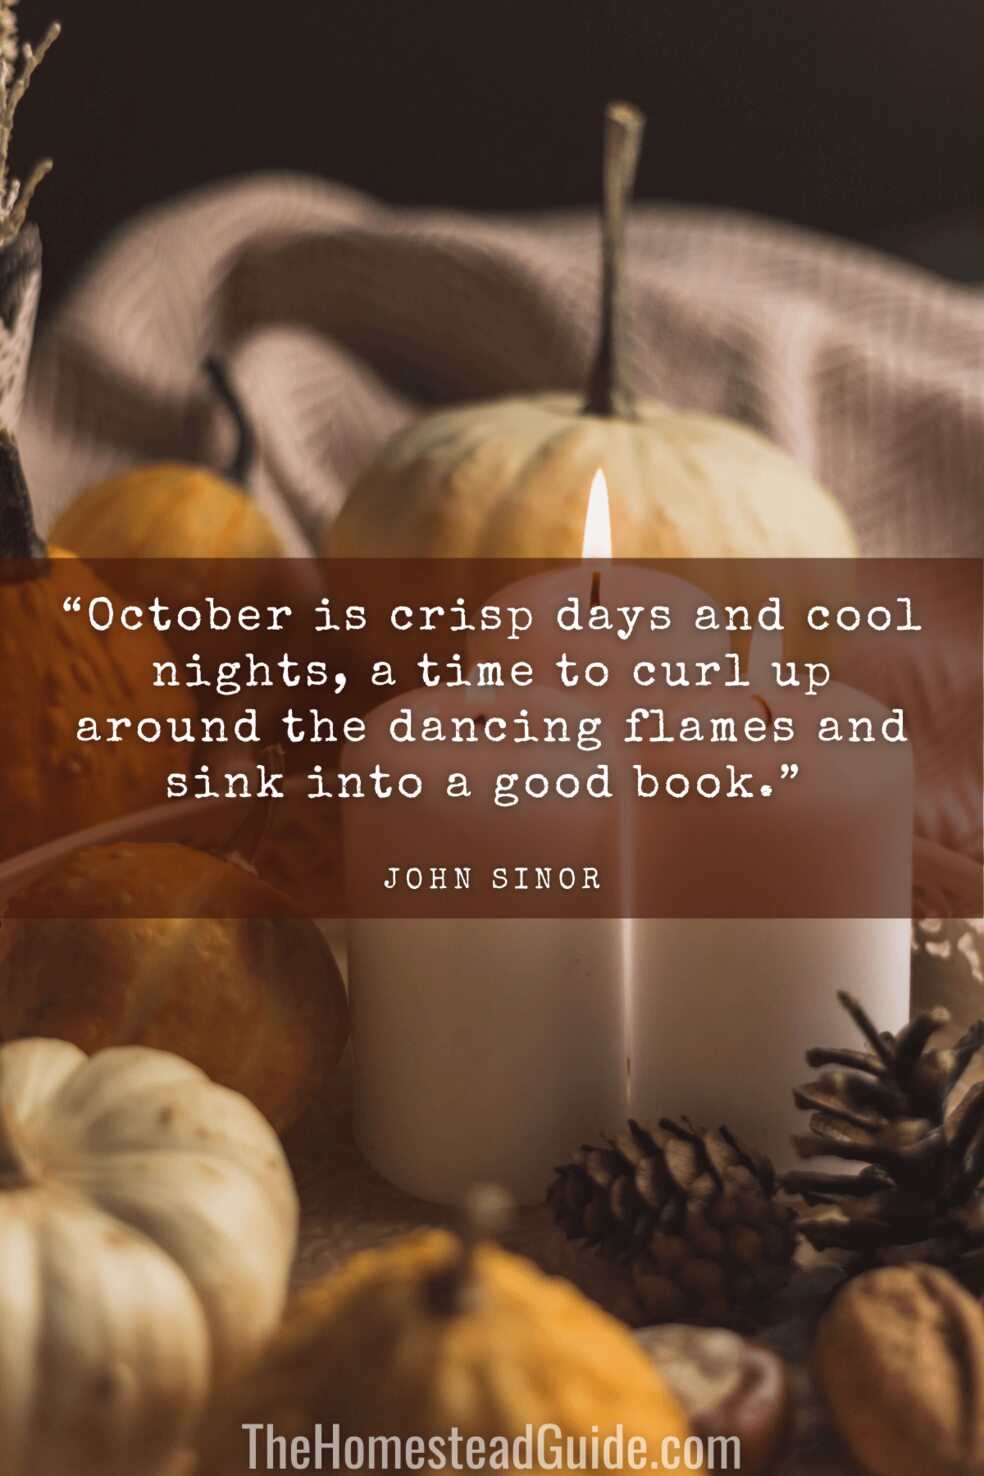 October is crisp days and cool nights, a time to curl up around the dancing flames and sink into a good book.